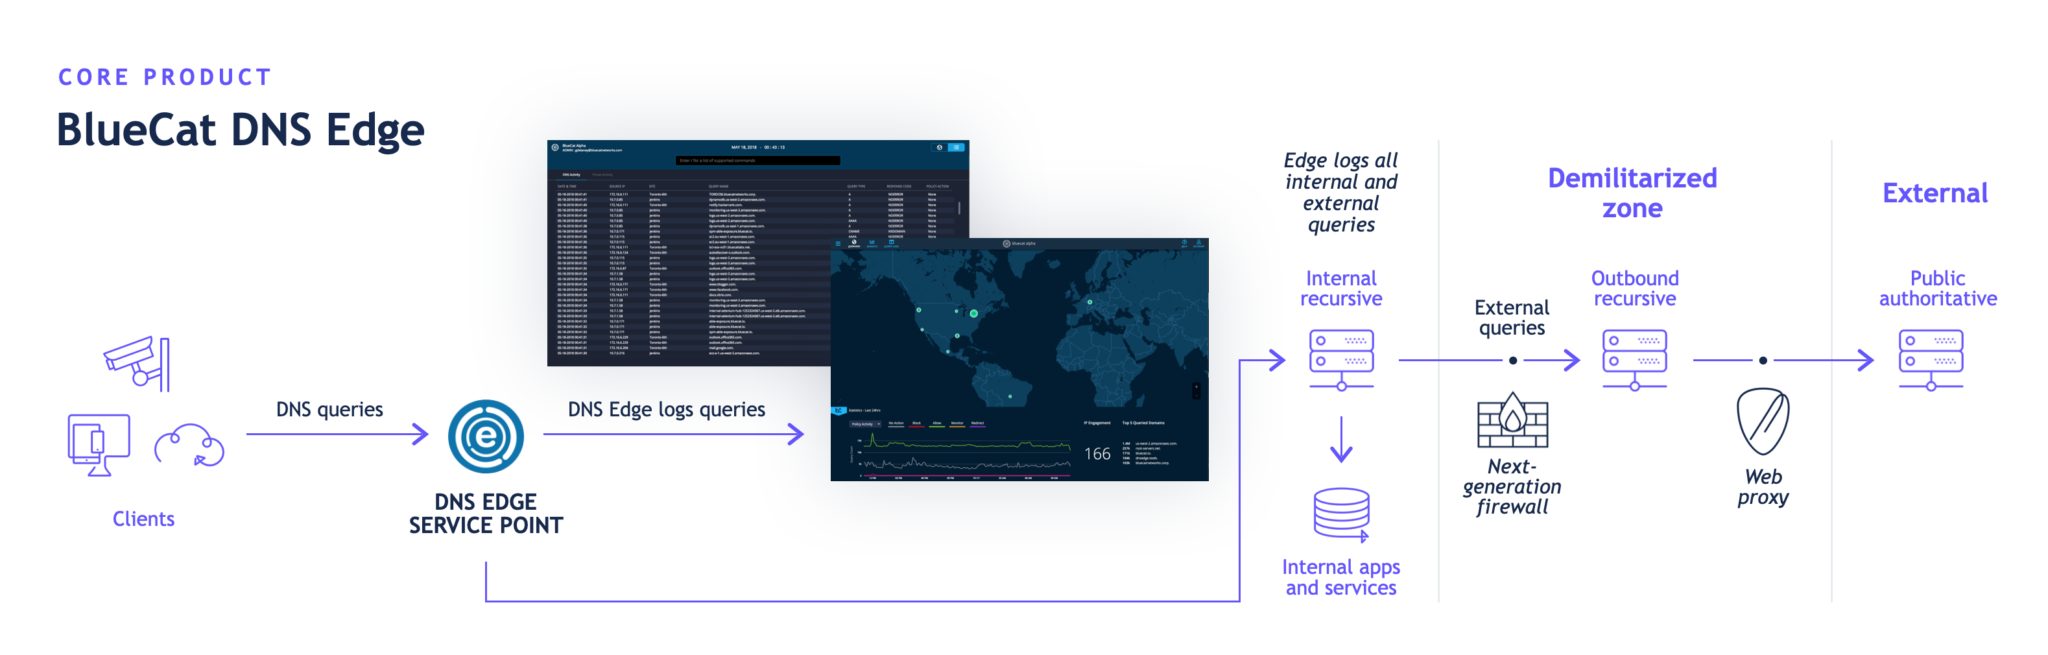 BlueCat DNS Edge provides protective DNS, giving visibility and control over internal and external DNS traffic